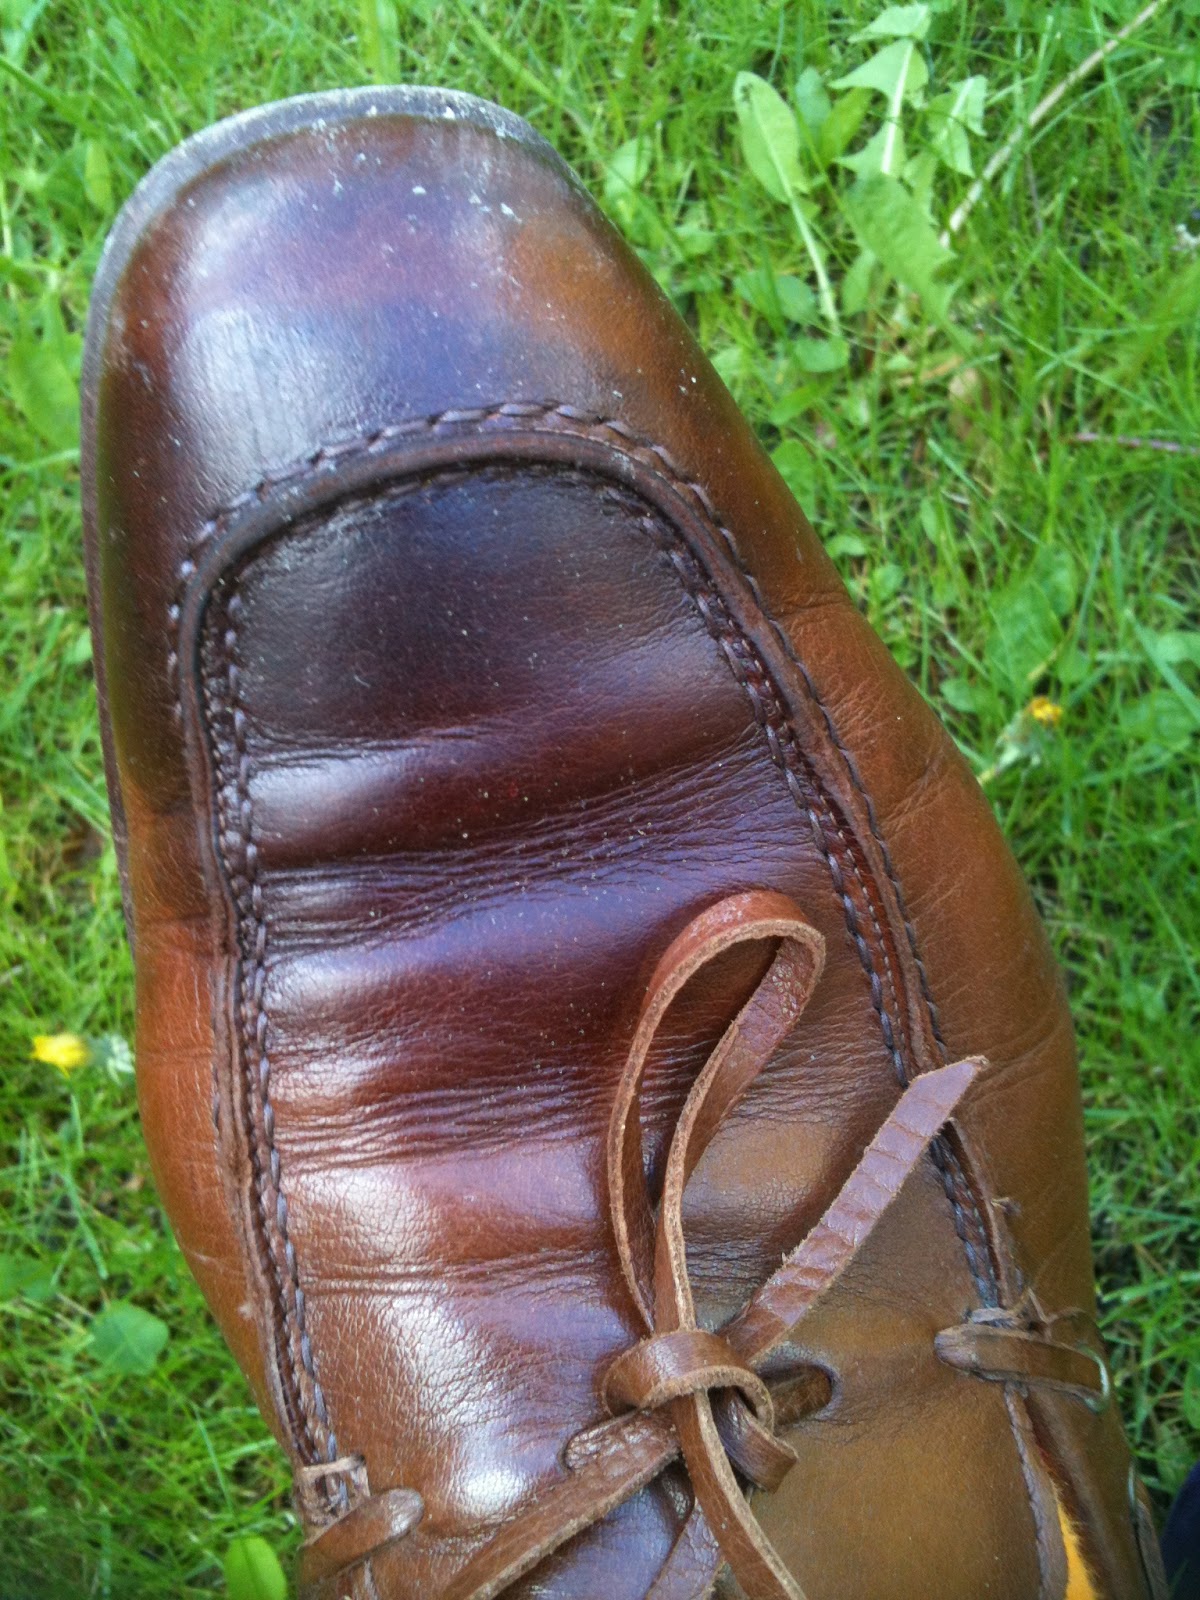 The Shoe AristoCat: Sloop loafers spoiled by marinated olive oil